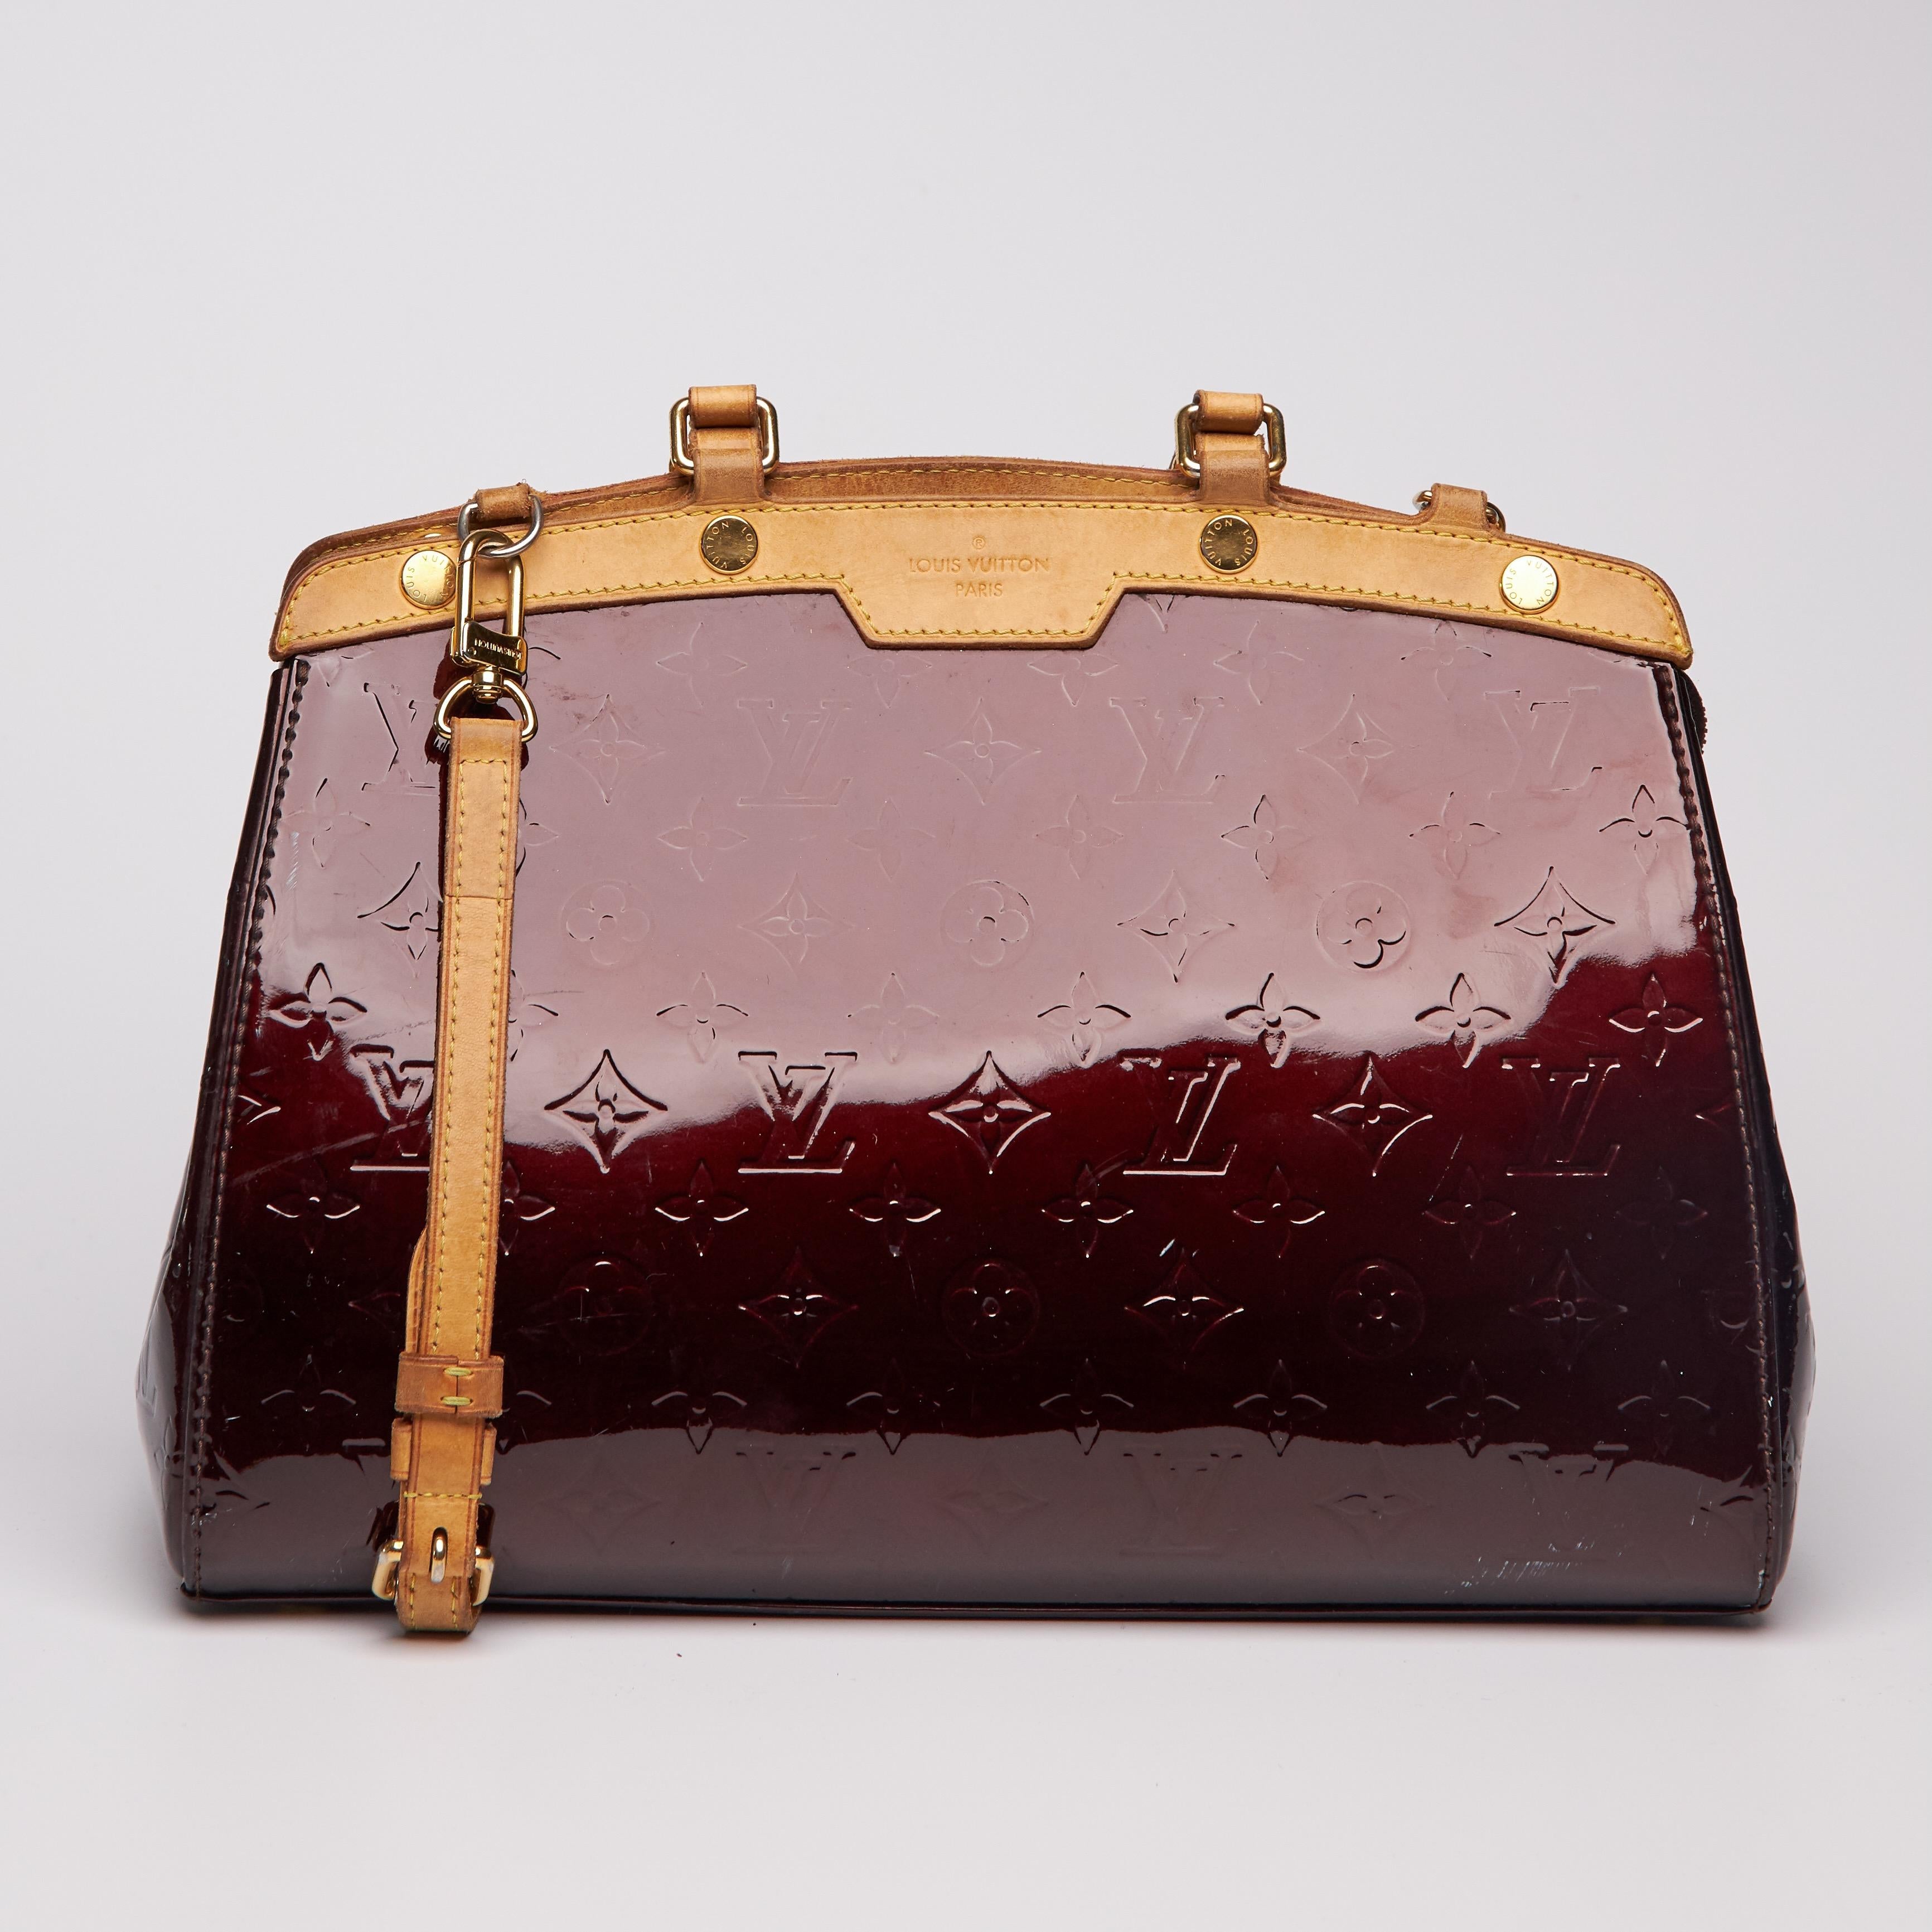 
This bag has a rich deep purple Louis Vuitton embossed vernis patent leather. The bag is lined in vachetta cowhide leather including top handles and an optional vachetta shoulder strap. The bag has brass hardware including handle rings, four feet